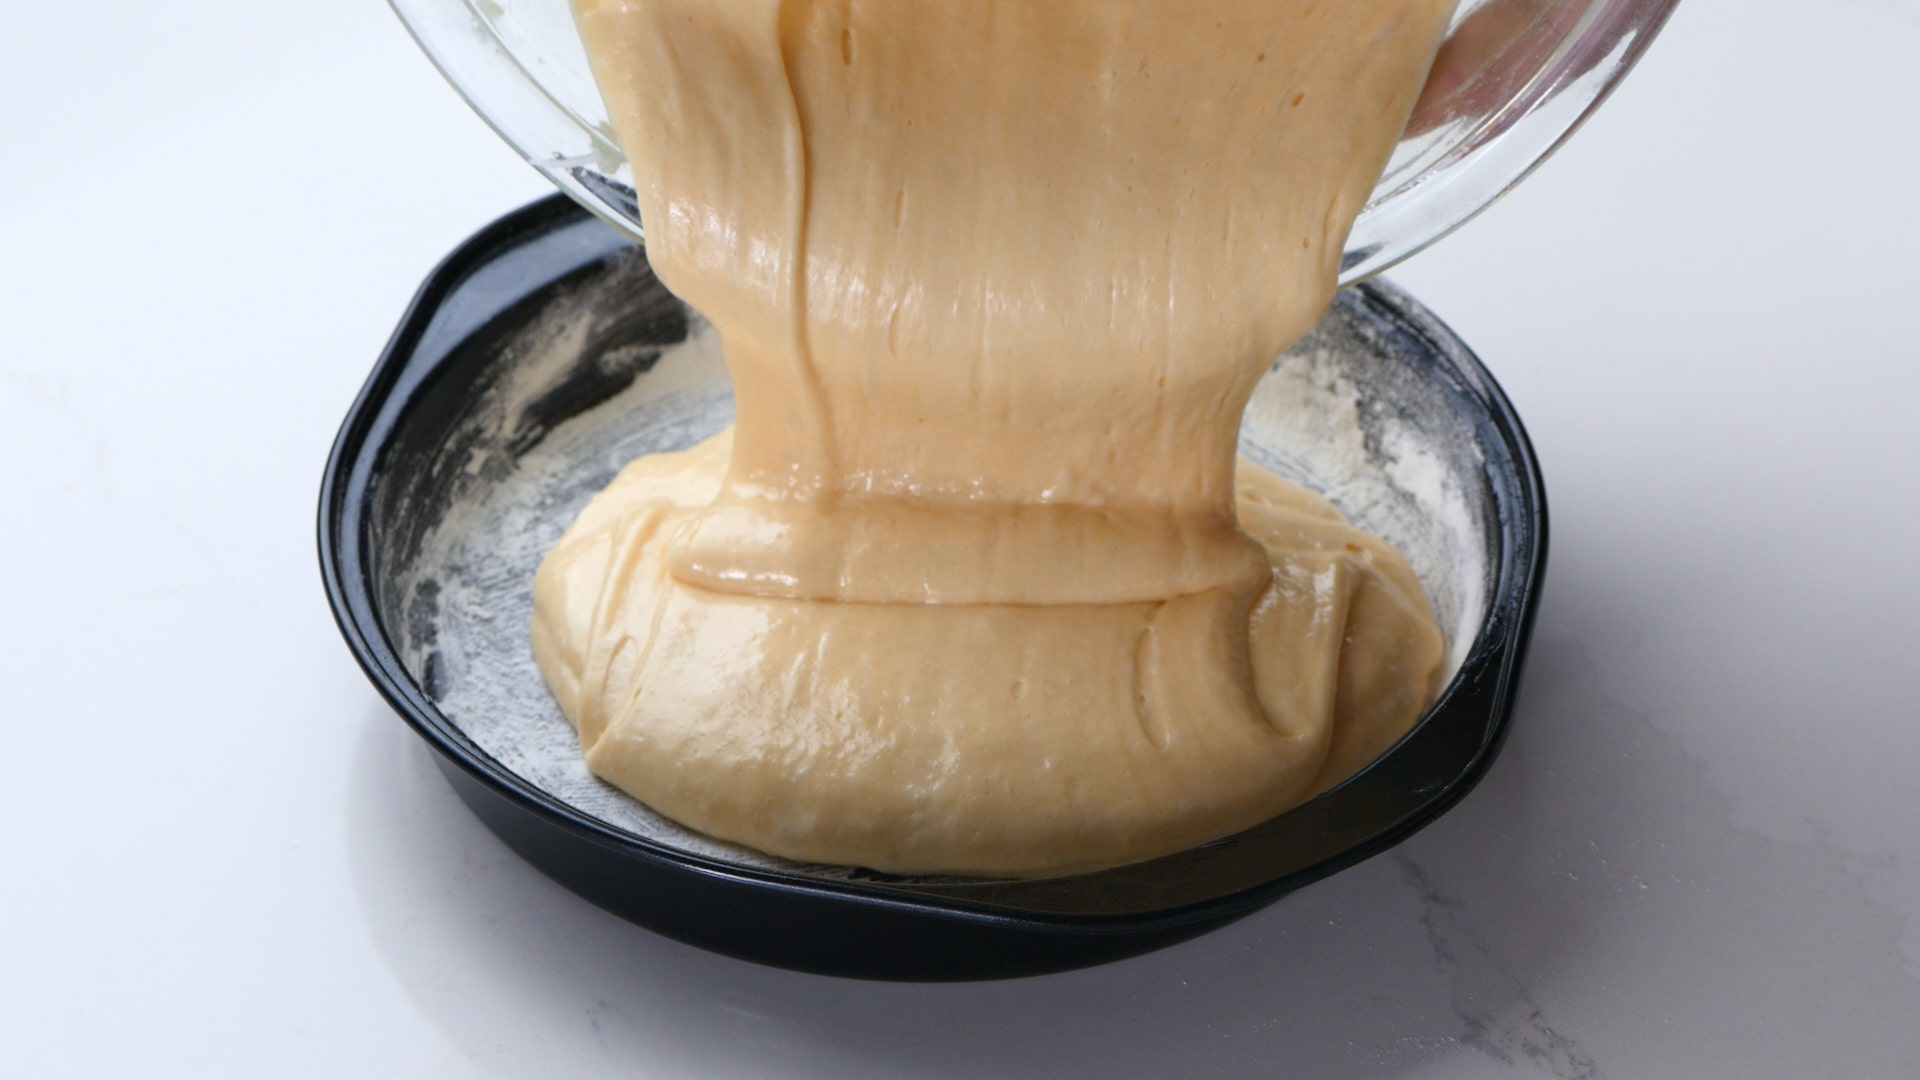 Pouring batter into mold